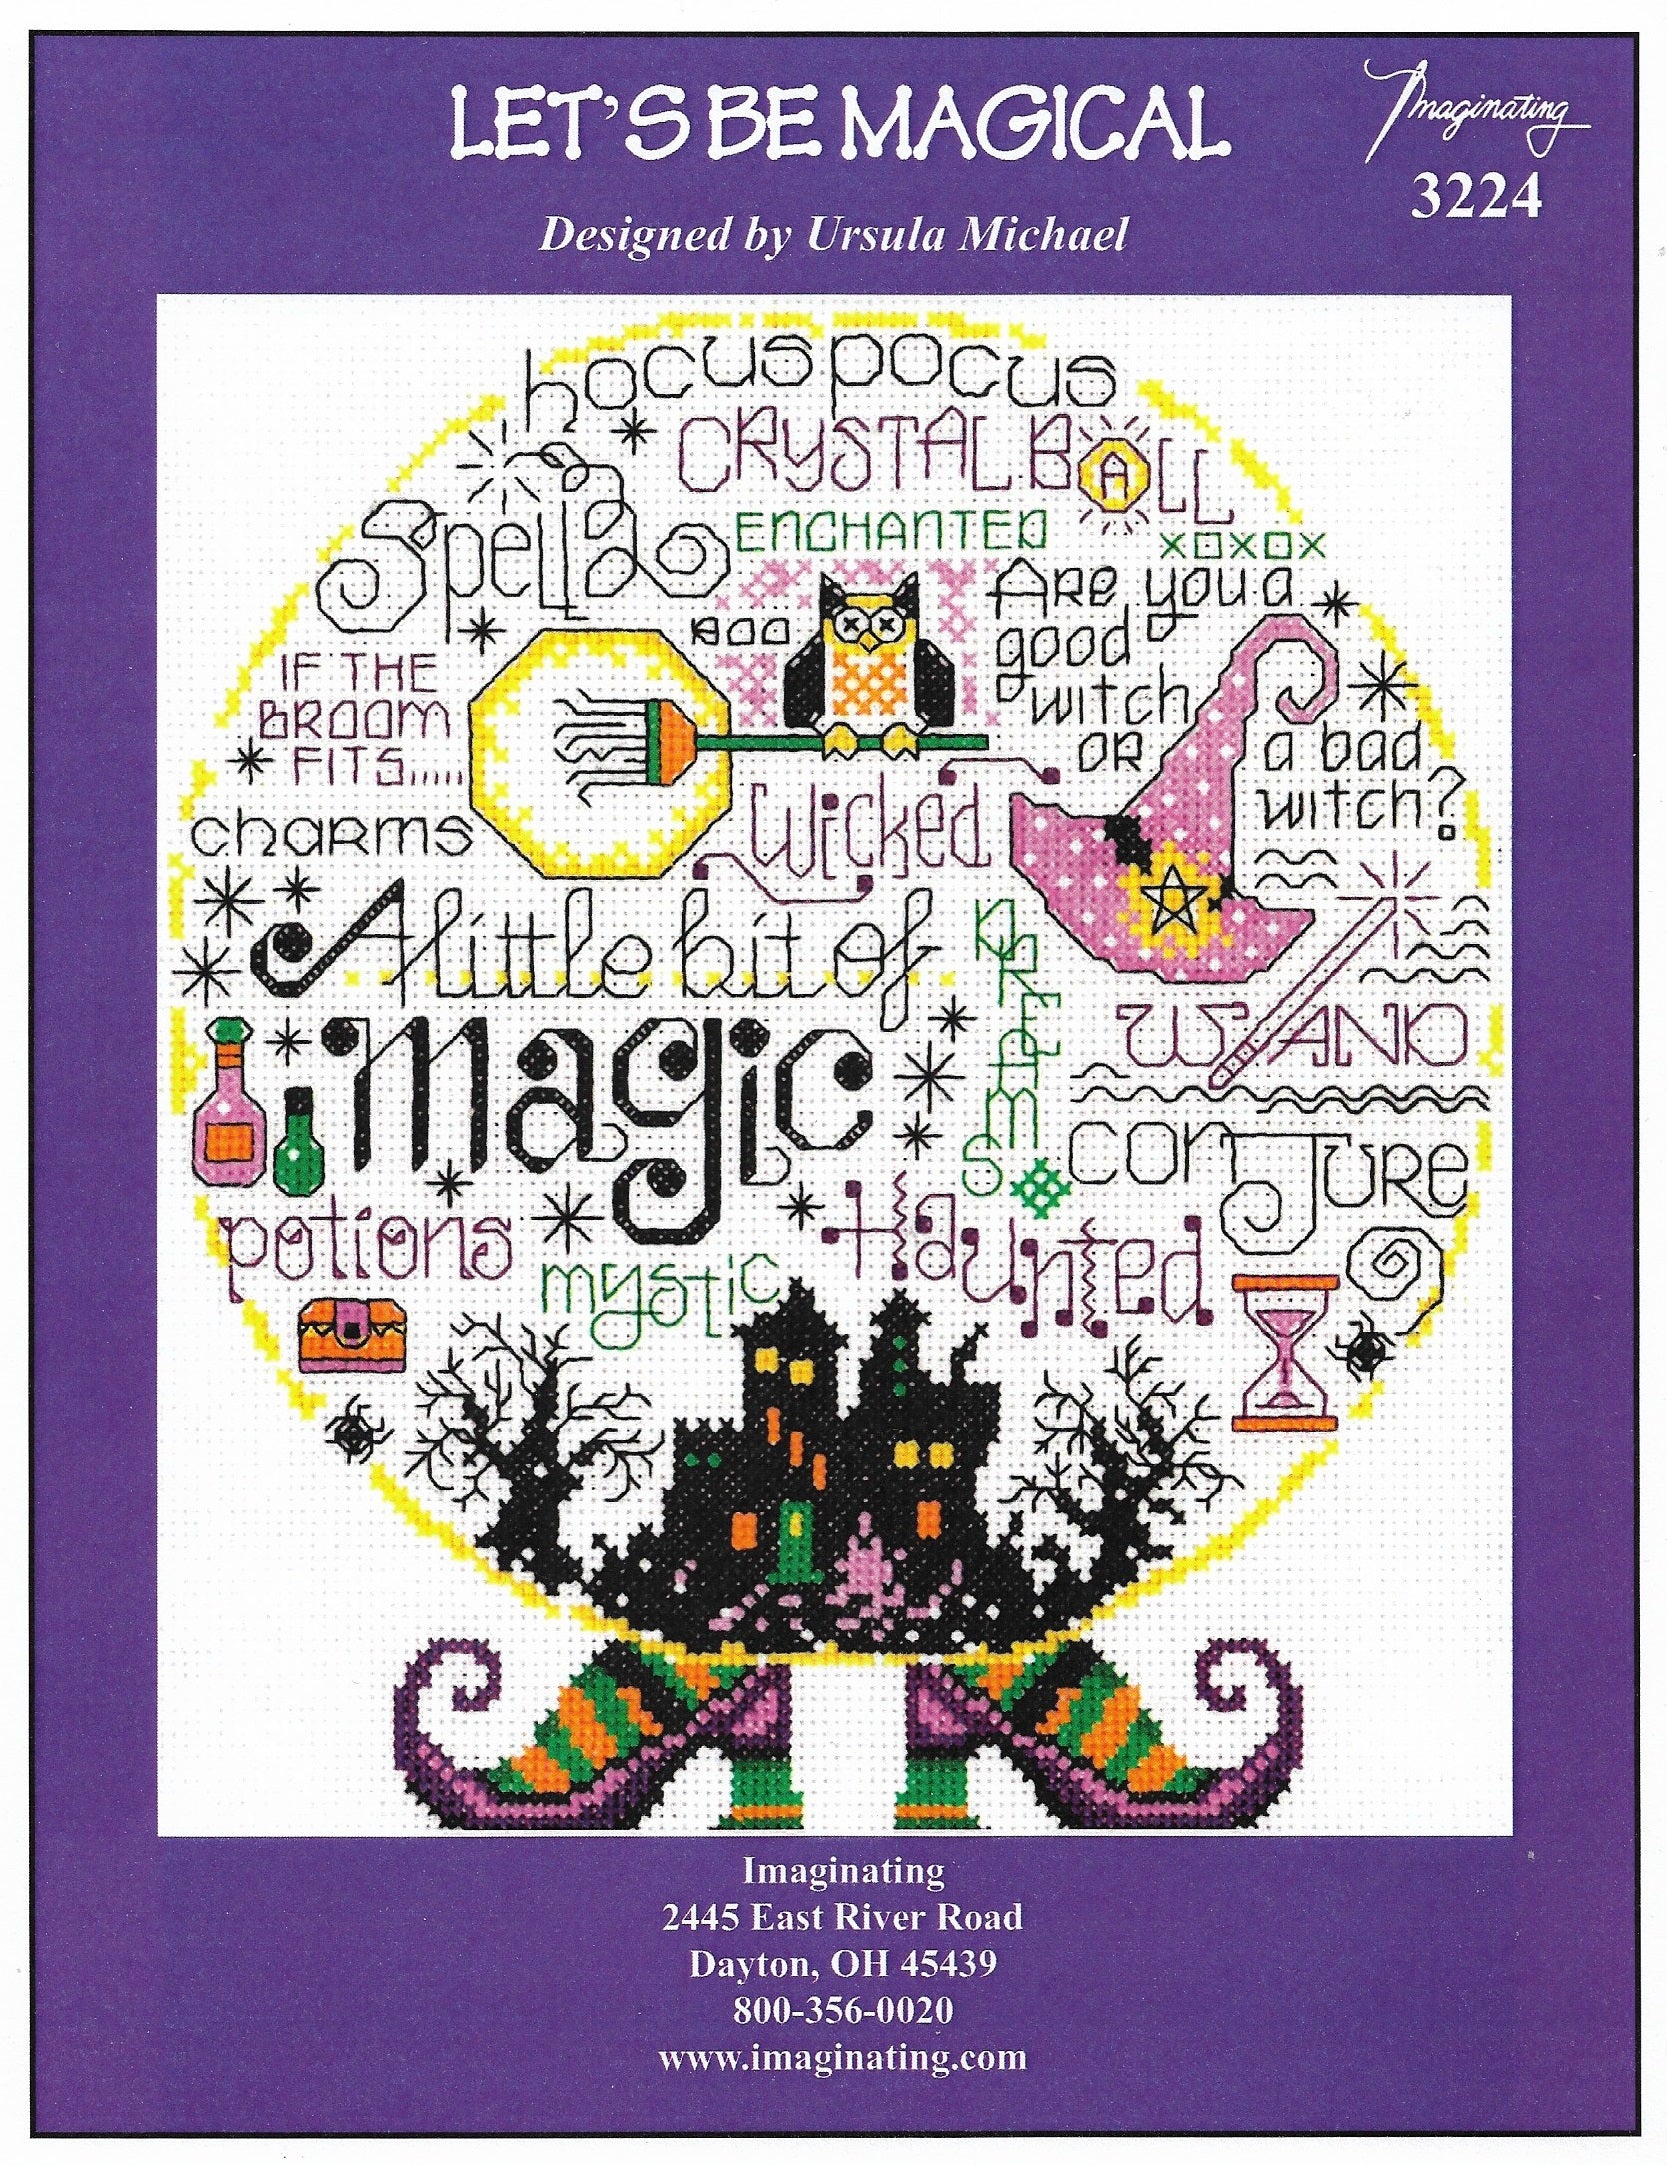 Imaginating Let's Be Magical 3224 Halloween cross stitch pattern